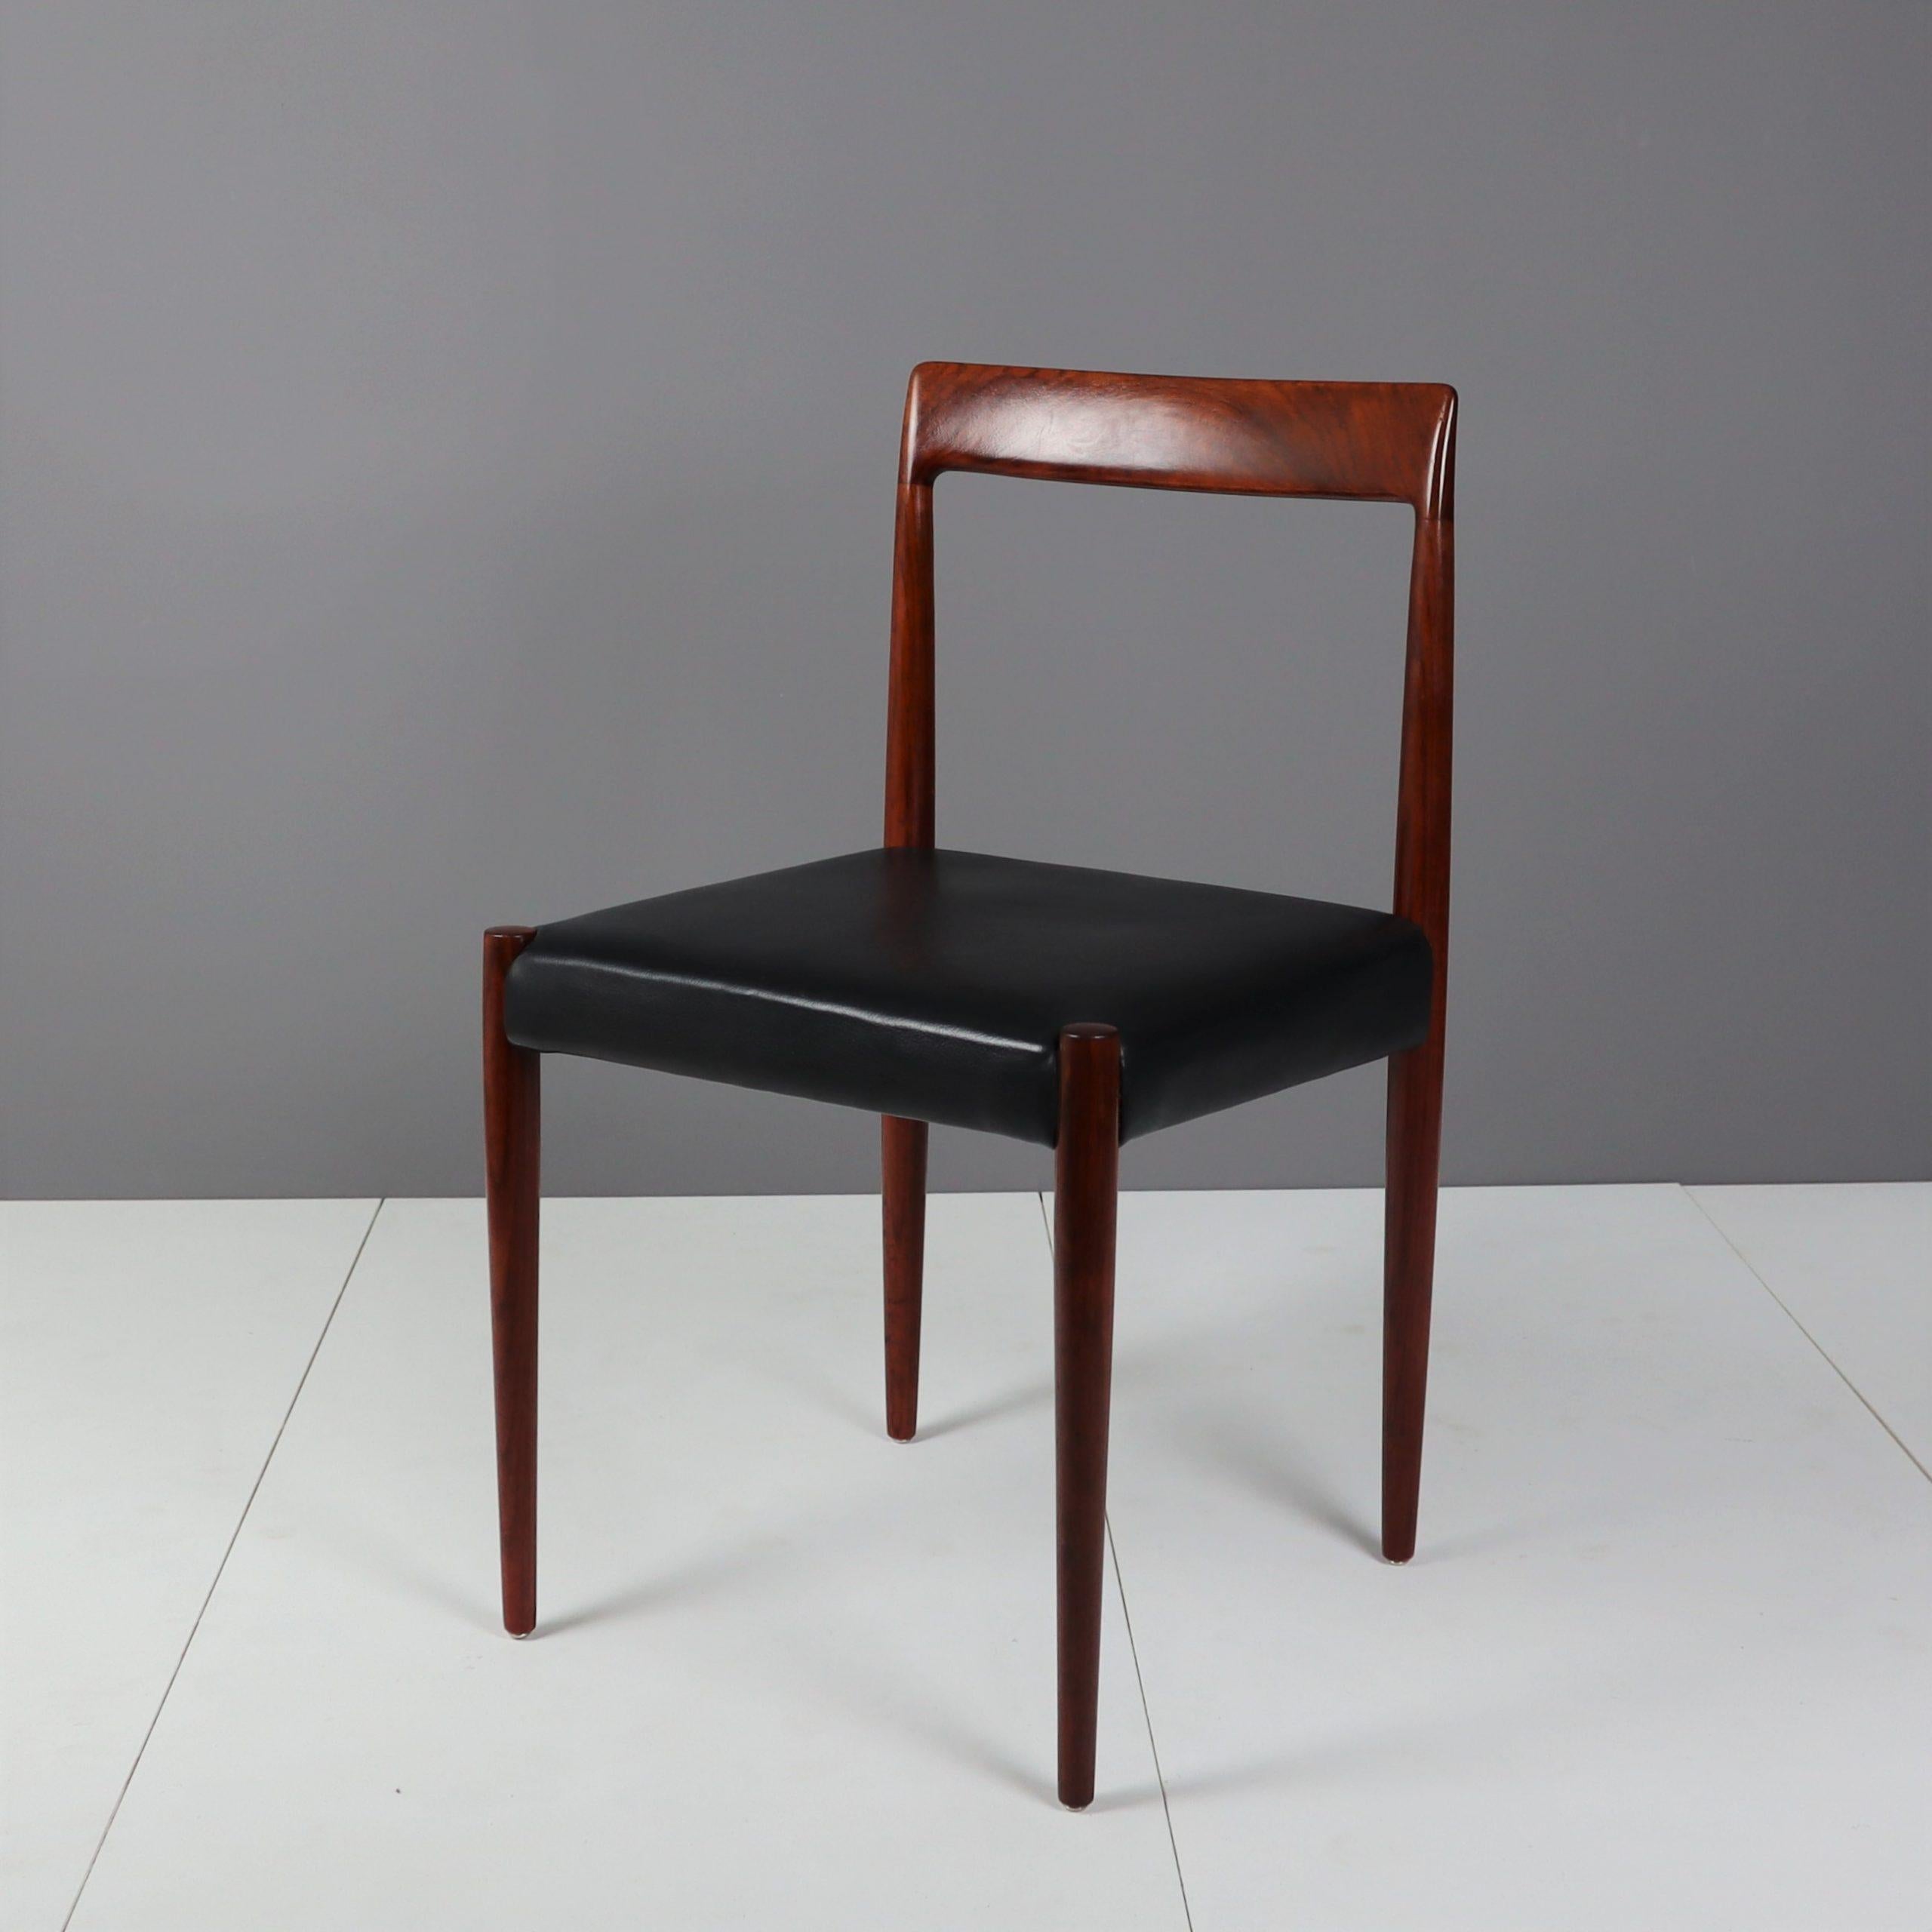 Midcentury Rosewood Chairs from Lübke In Good Condition For Sale In Stockholm, SE